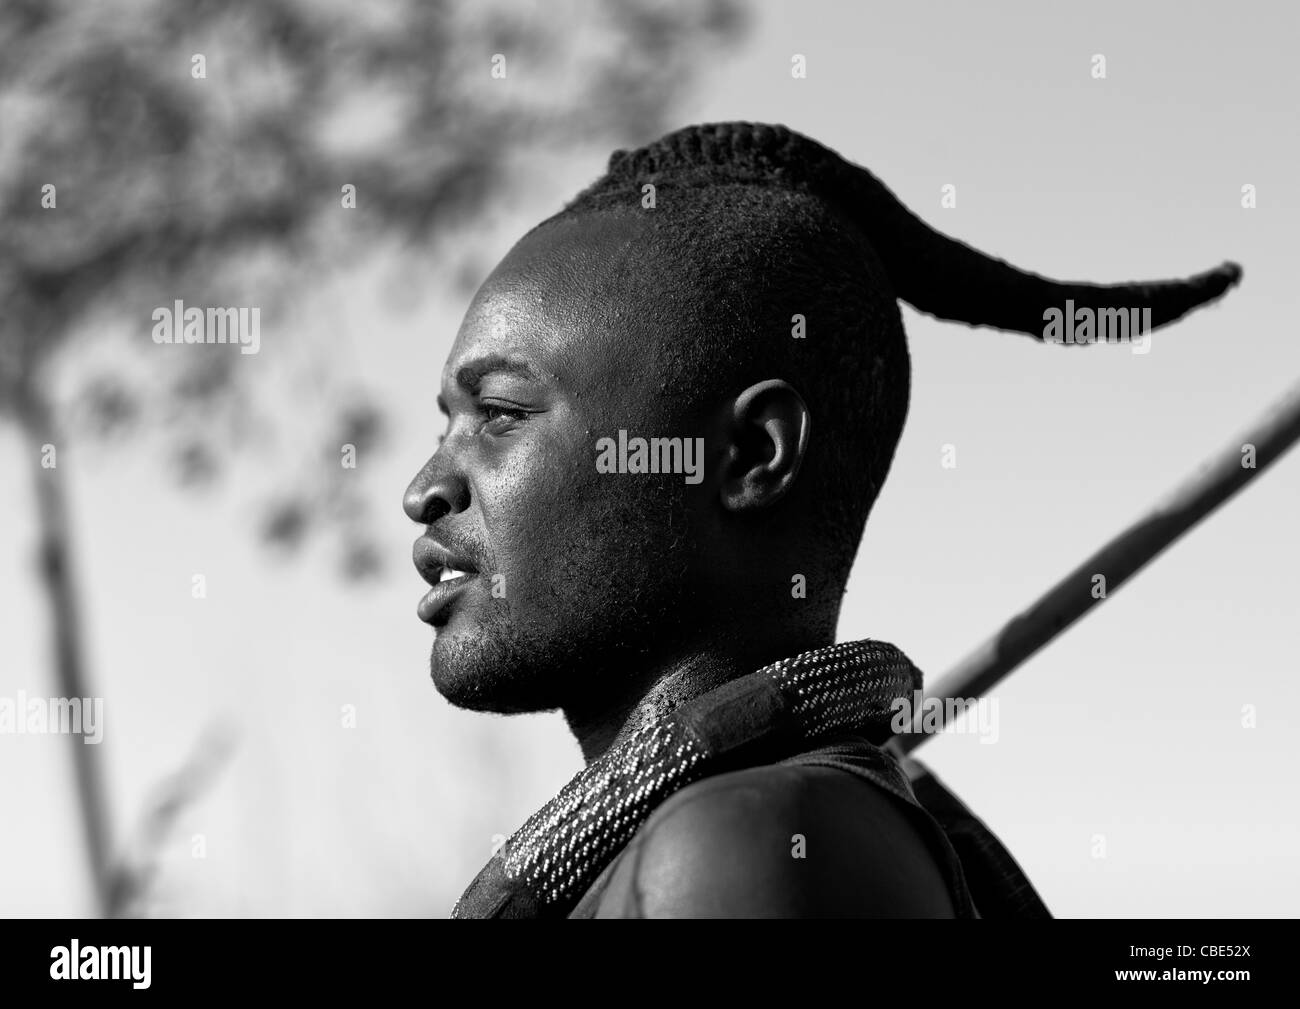 muhimba-young-man-with-traditional-hairs